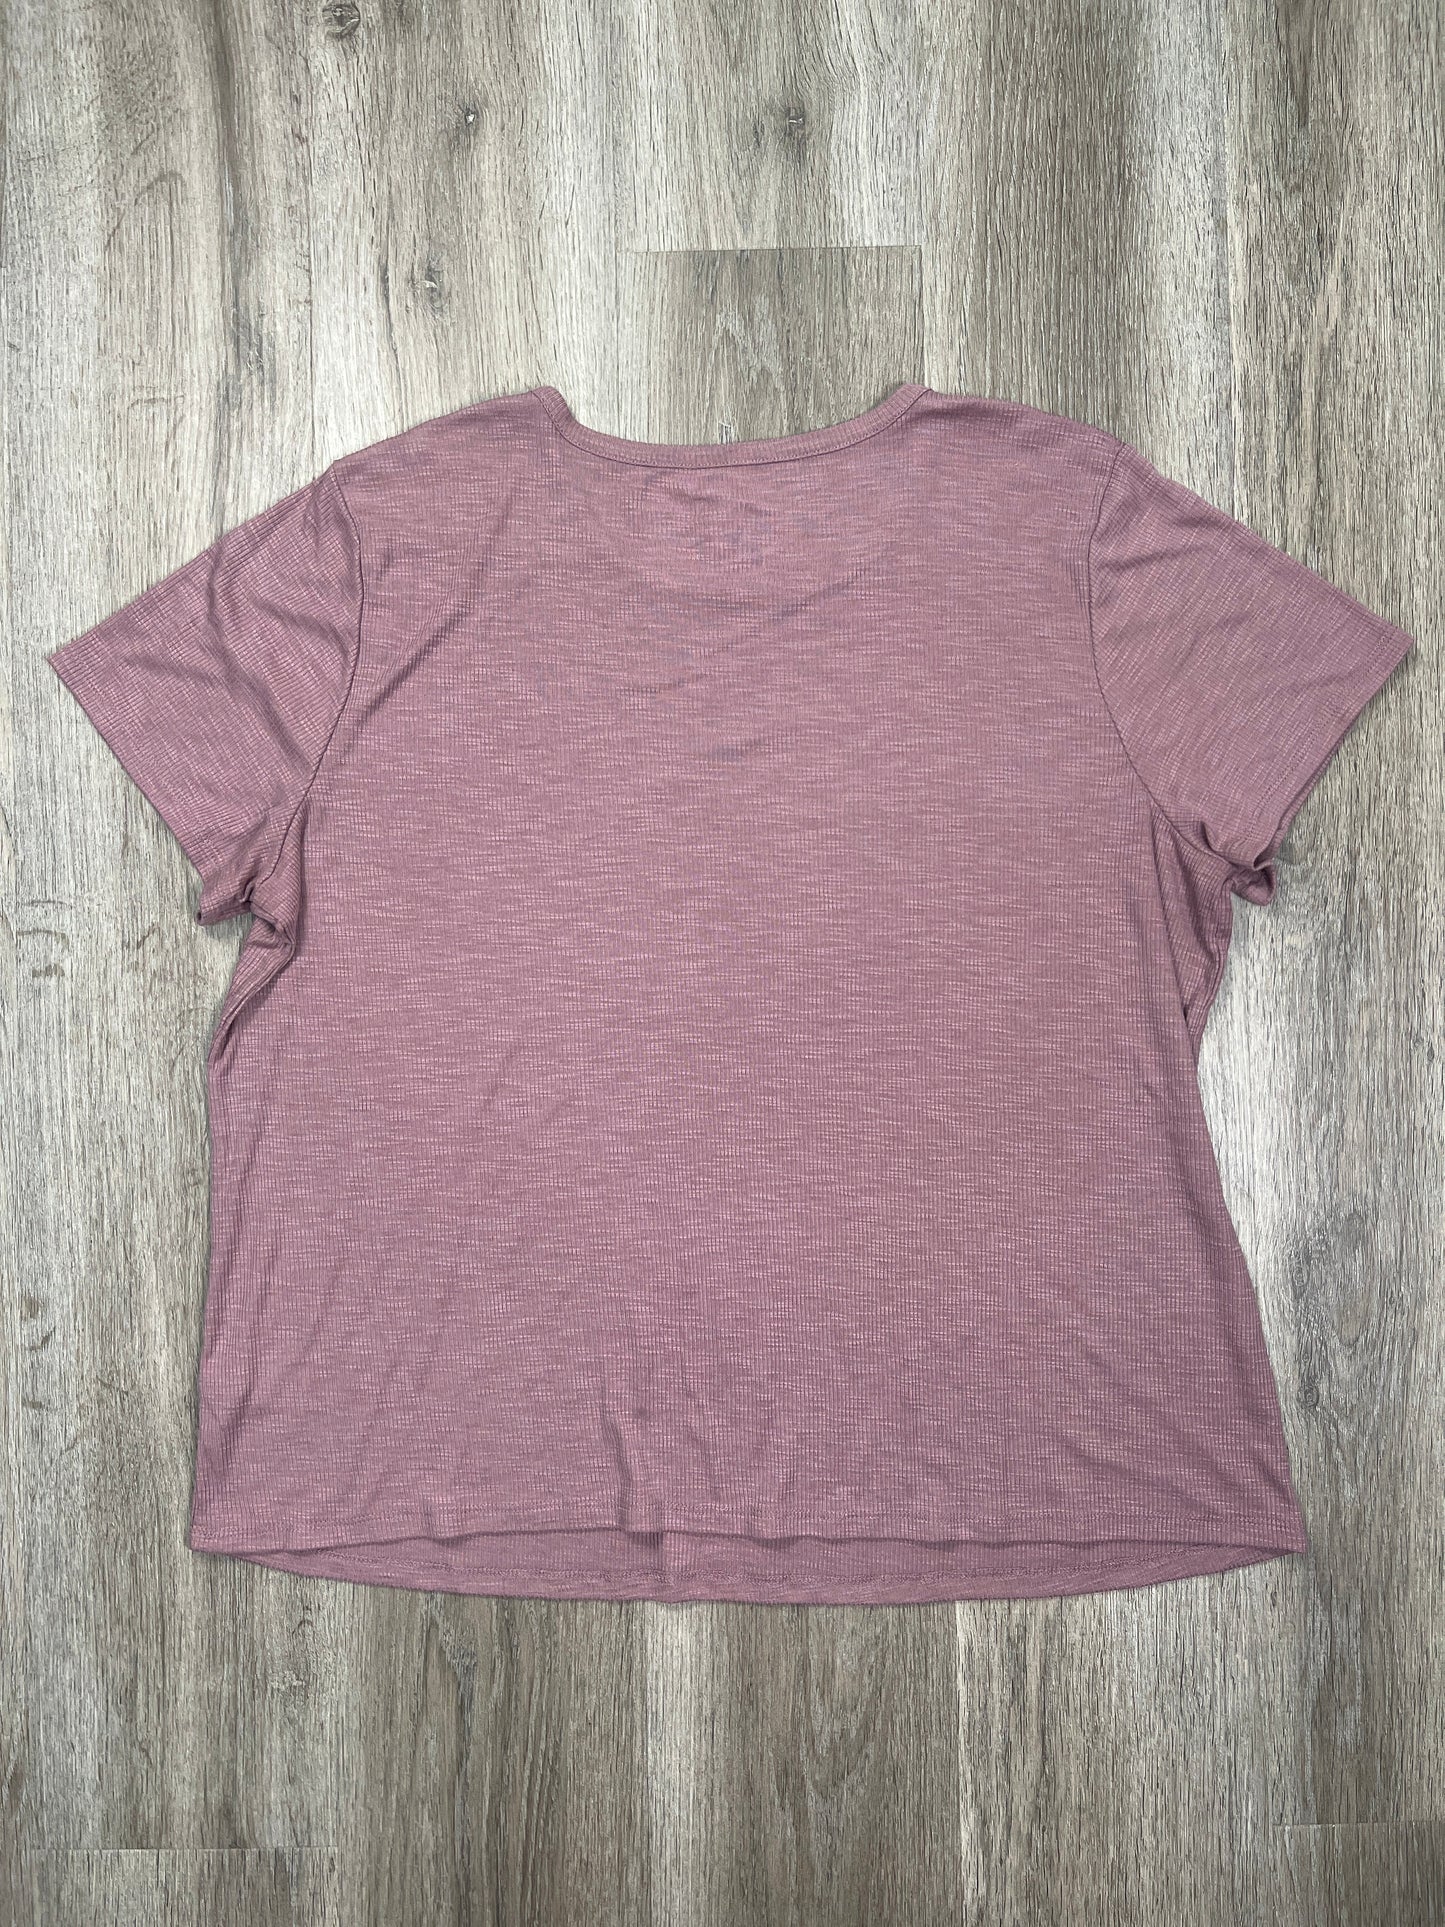 Purple Top Short Sleeve Basic Maurices, Size 3x